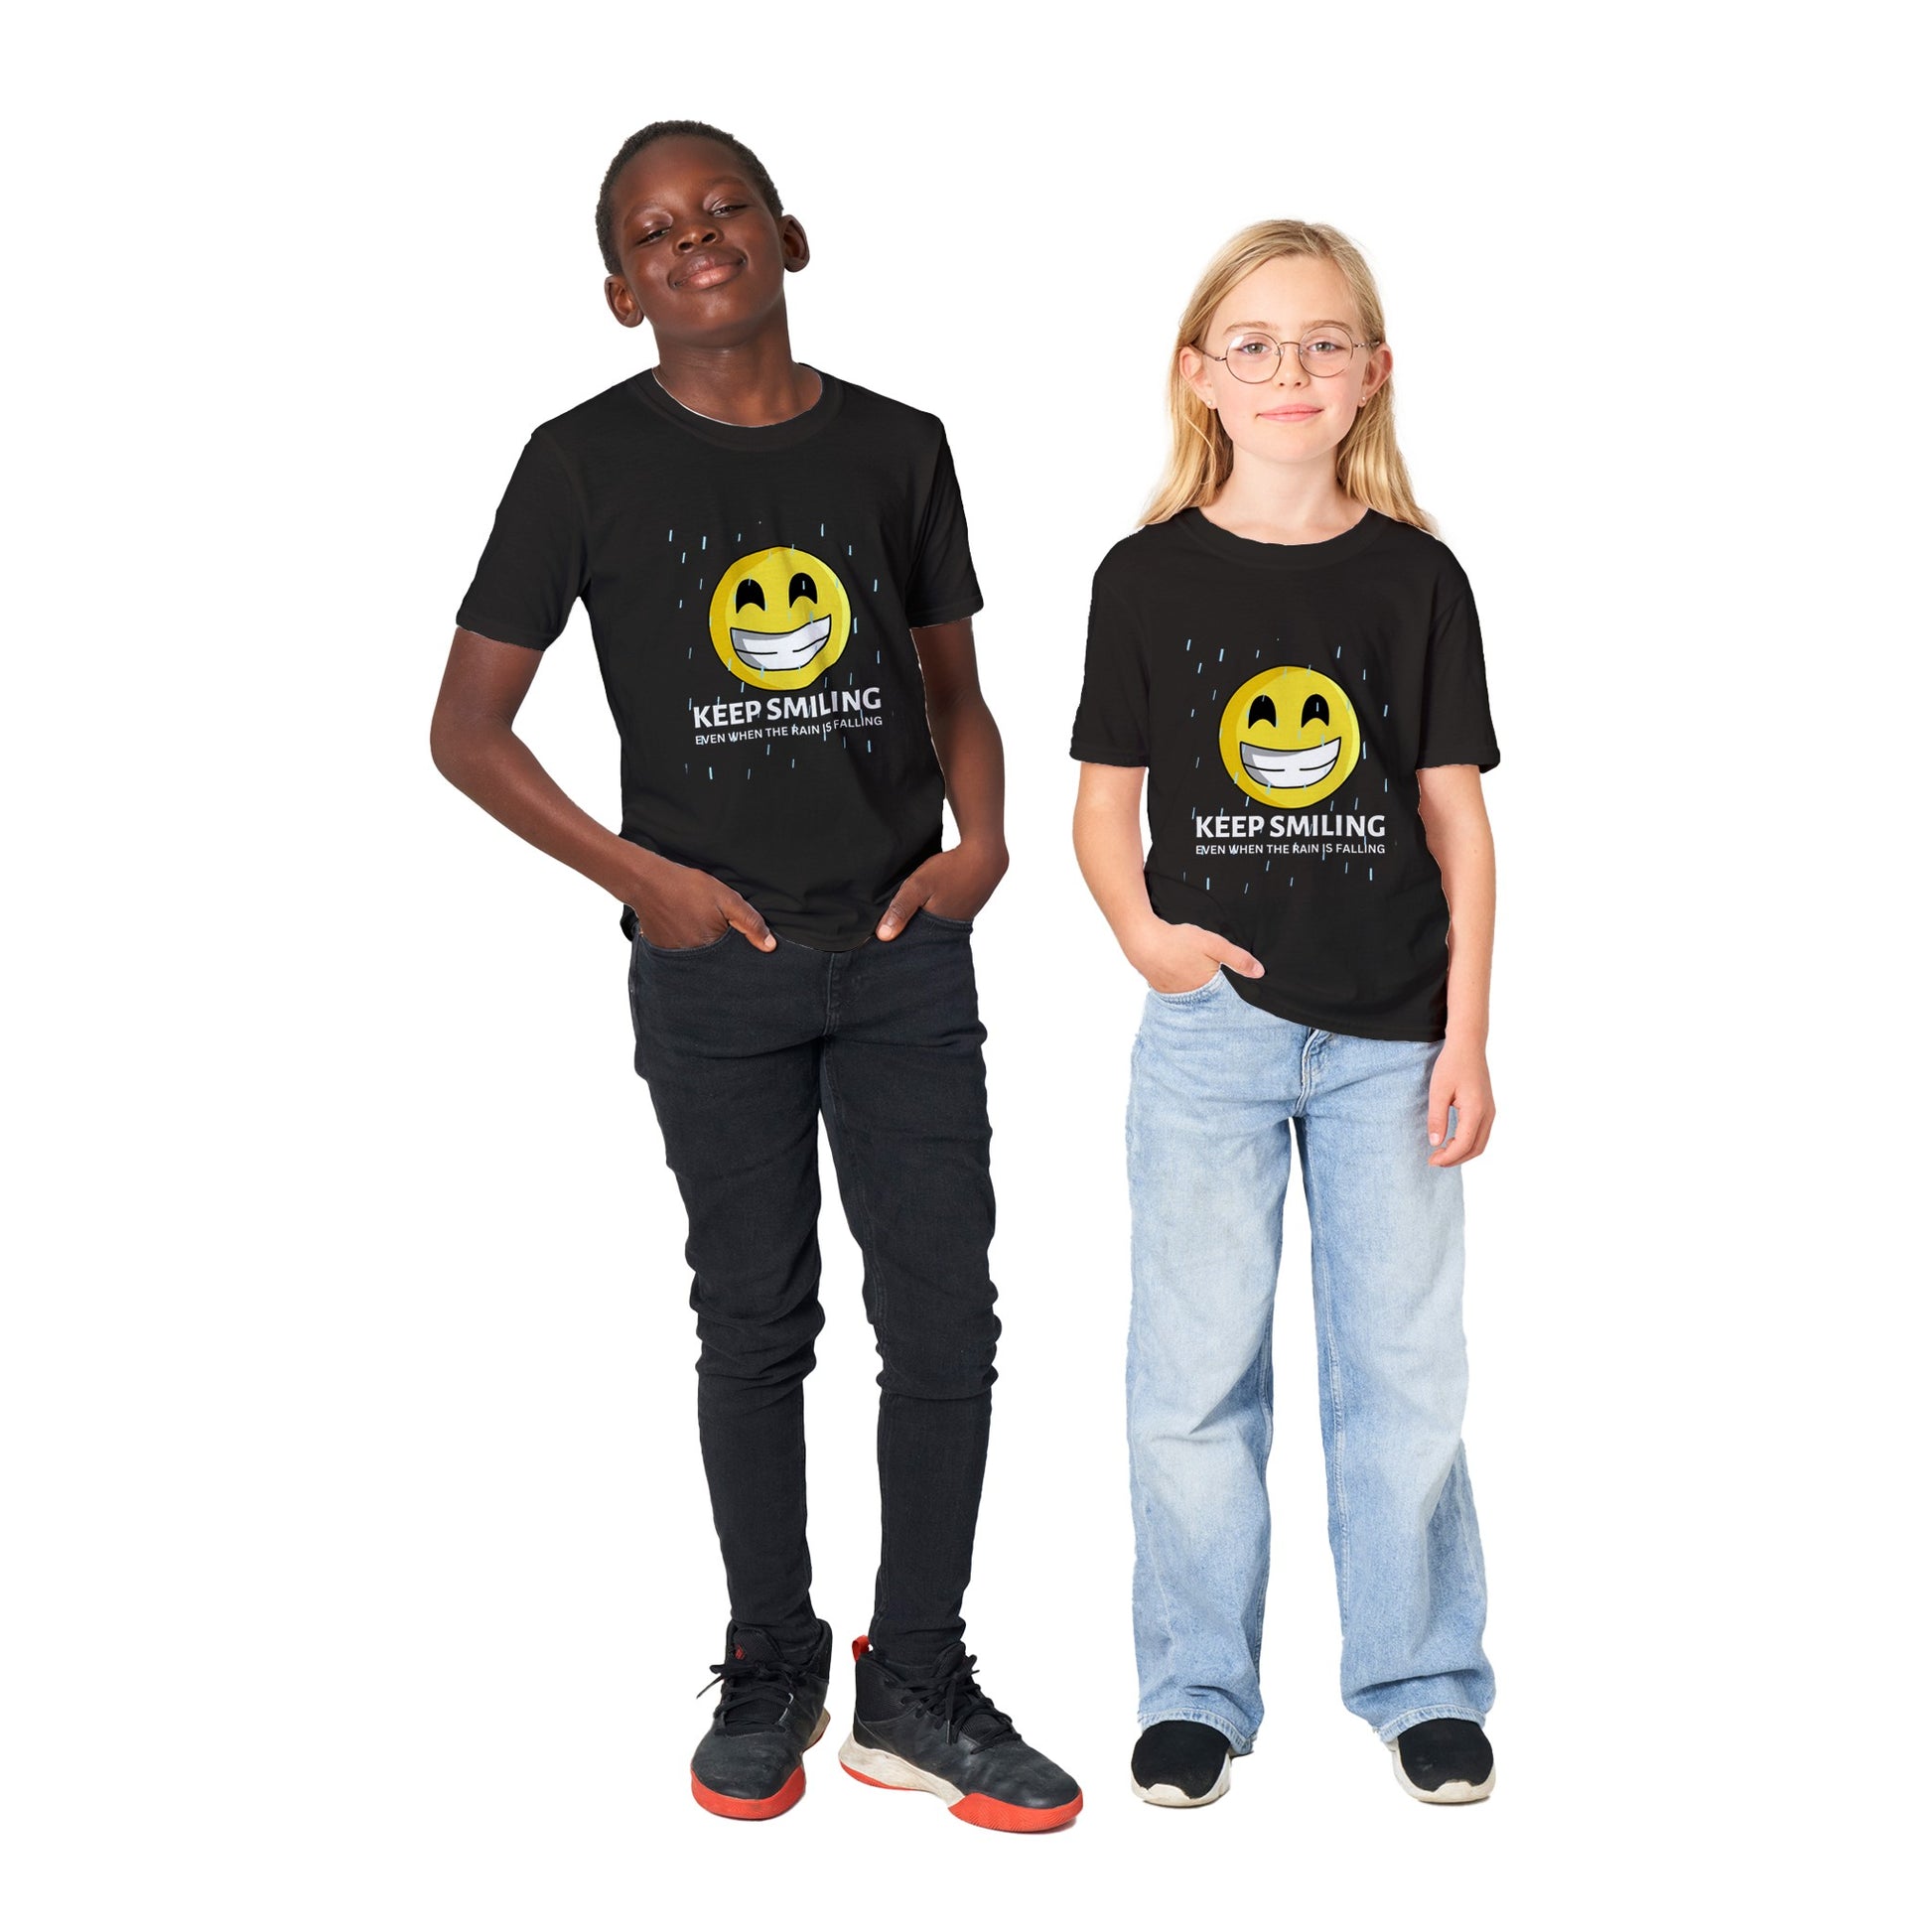 Inspirational Kids T-Shirt with a positive affirmation: "I Keep Smiling, even when the rain is falling". An image of an emoji smiling and drop of rain - black